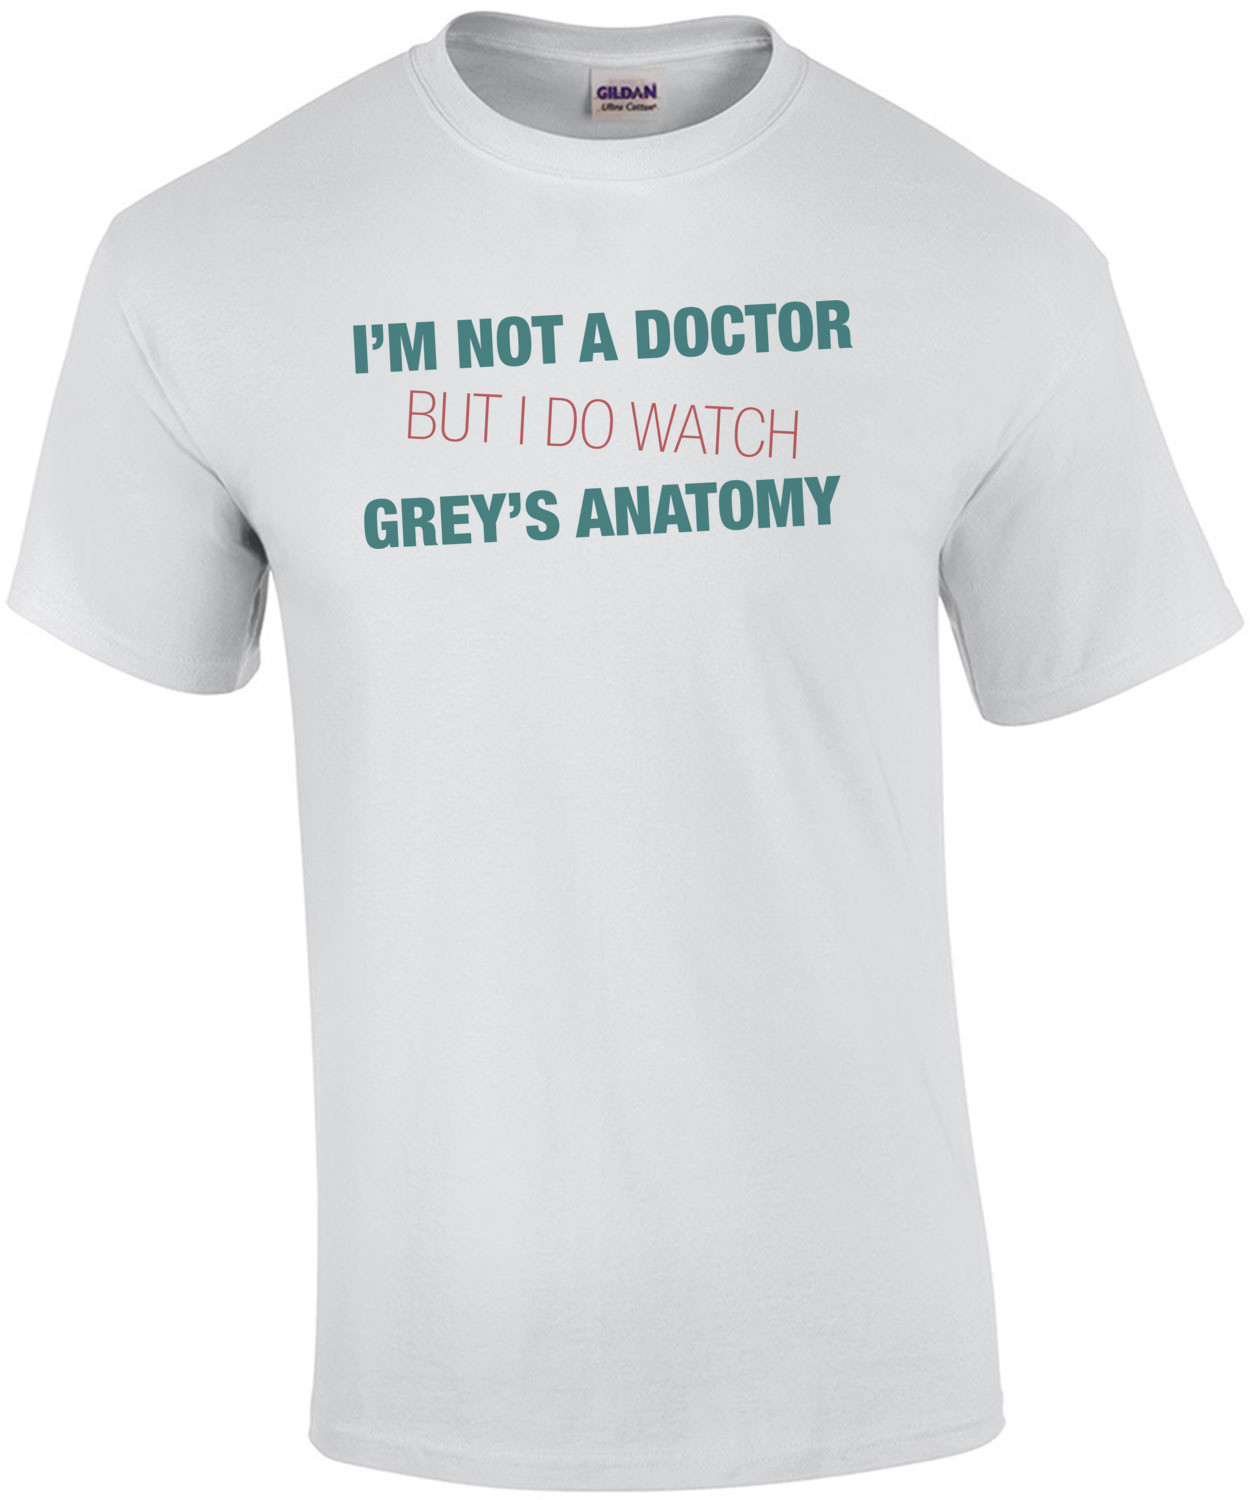 I'm Not a Doctor But I Watch Grey's Anatomy